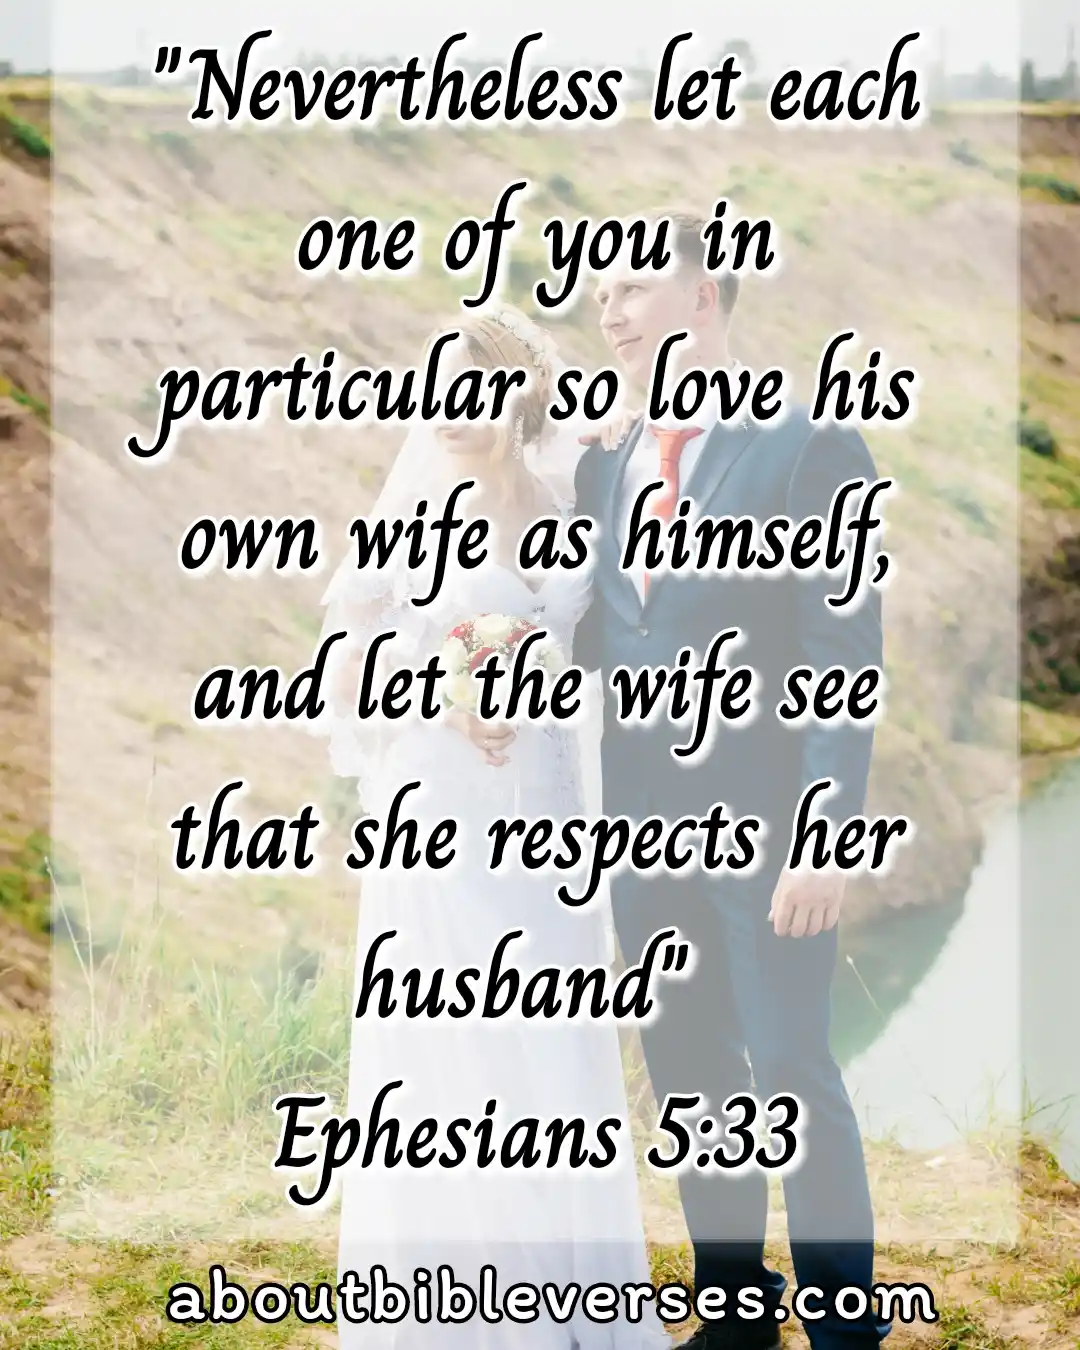 Bible Verses About Healthy Relationships (Ephesians 5:33)